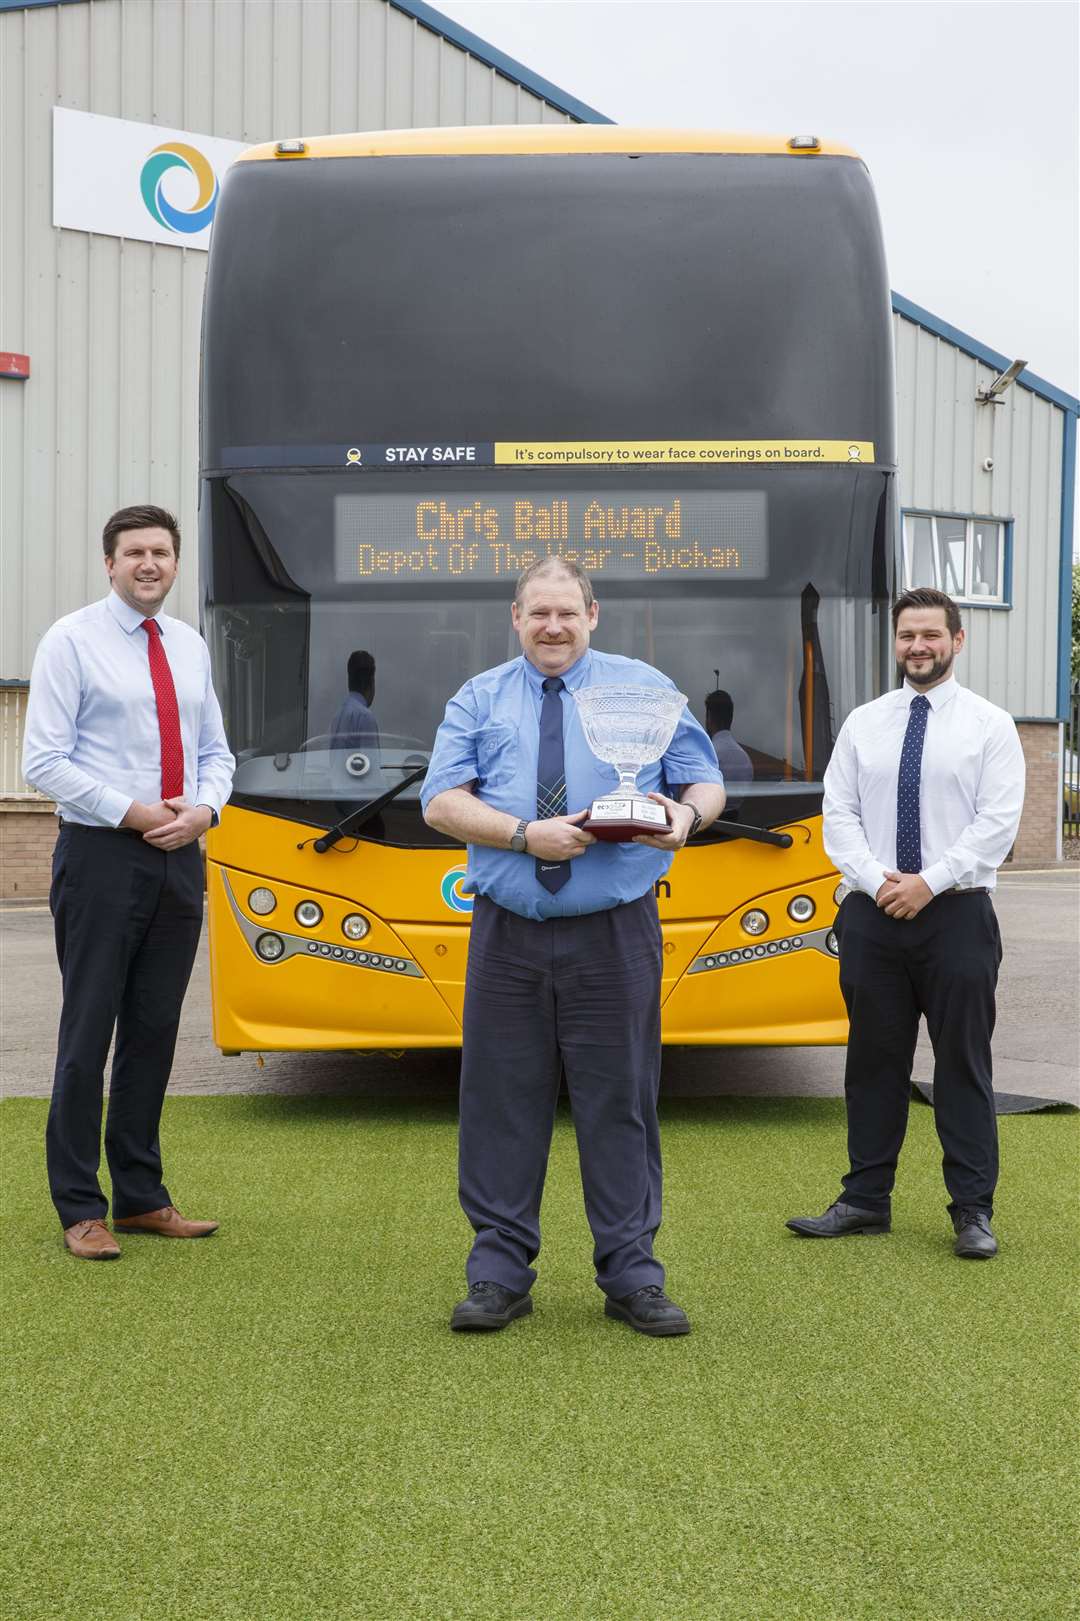 Peter Knight, John Thompson and Dan Bowden from Stagecoach Bluebird at the Buchan depot which won in the firm's eco-driving champions awards scheme.